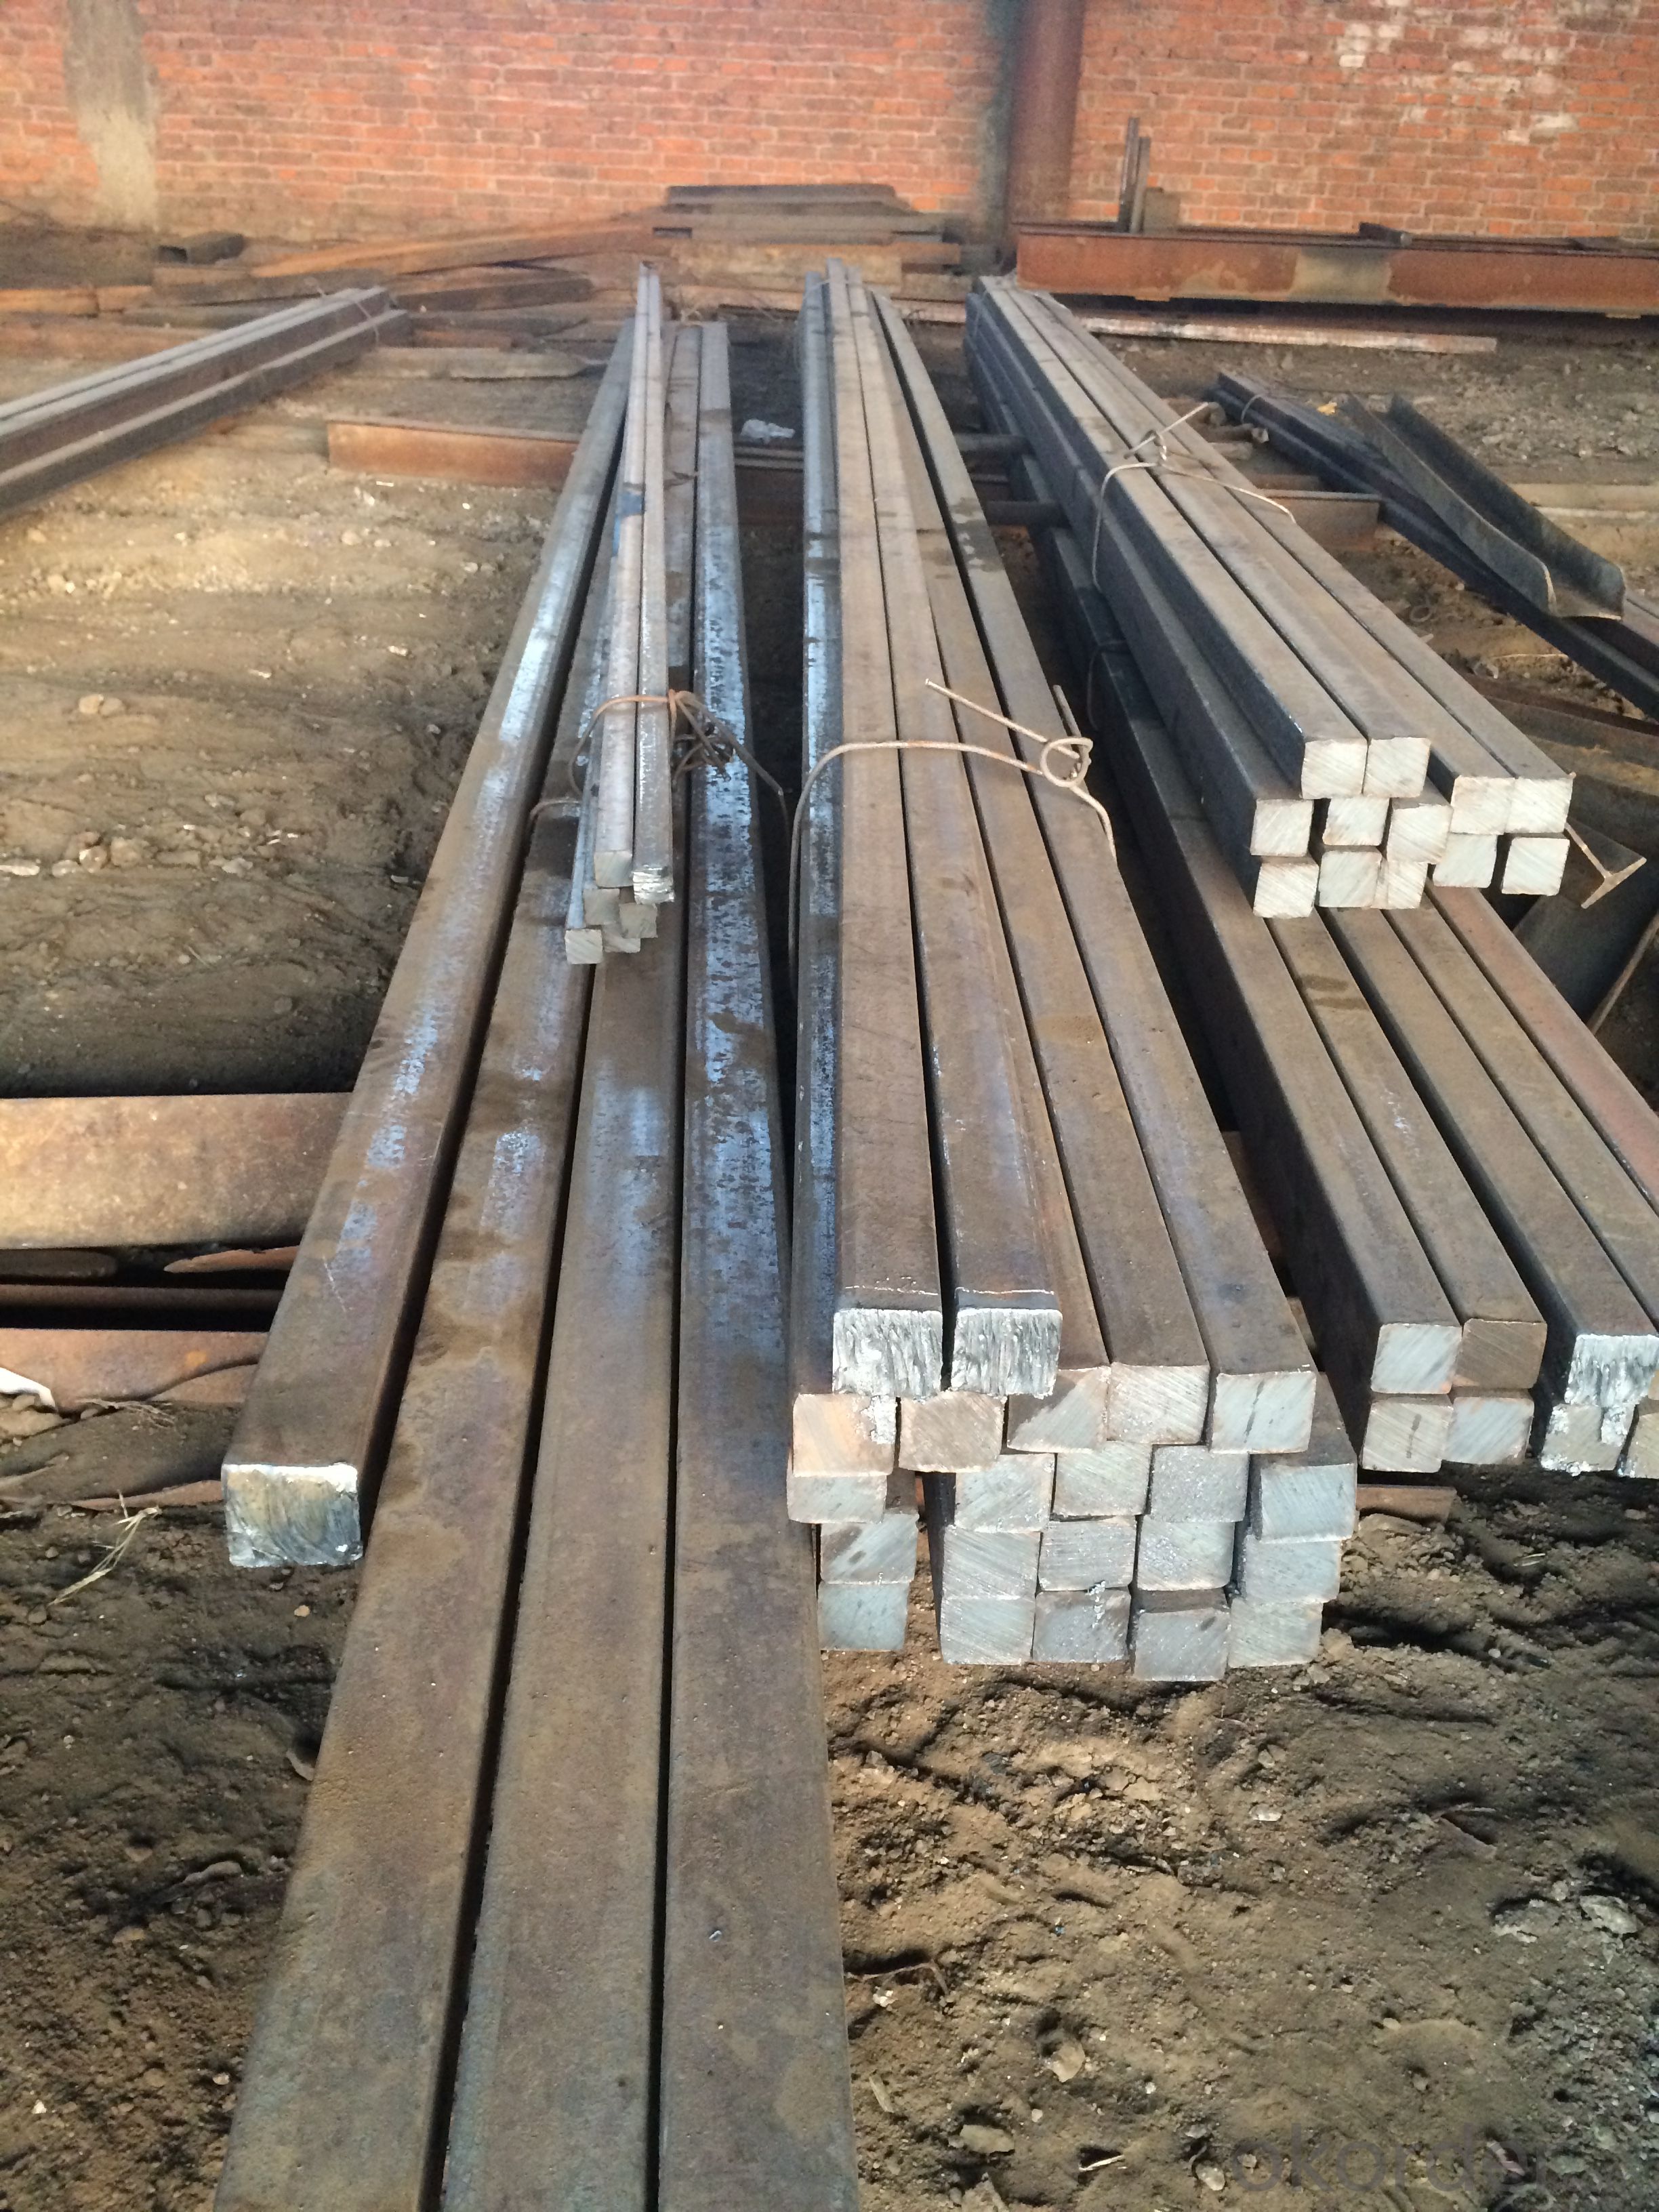 Hot Rolled Steel Square Bar Q235, A36 SS400